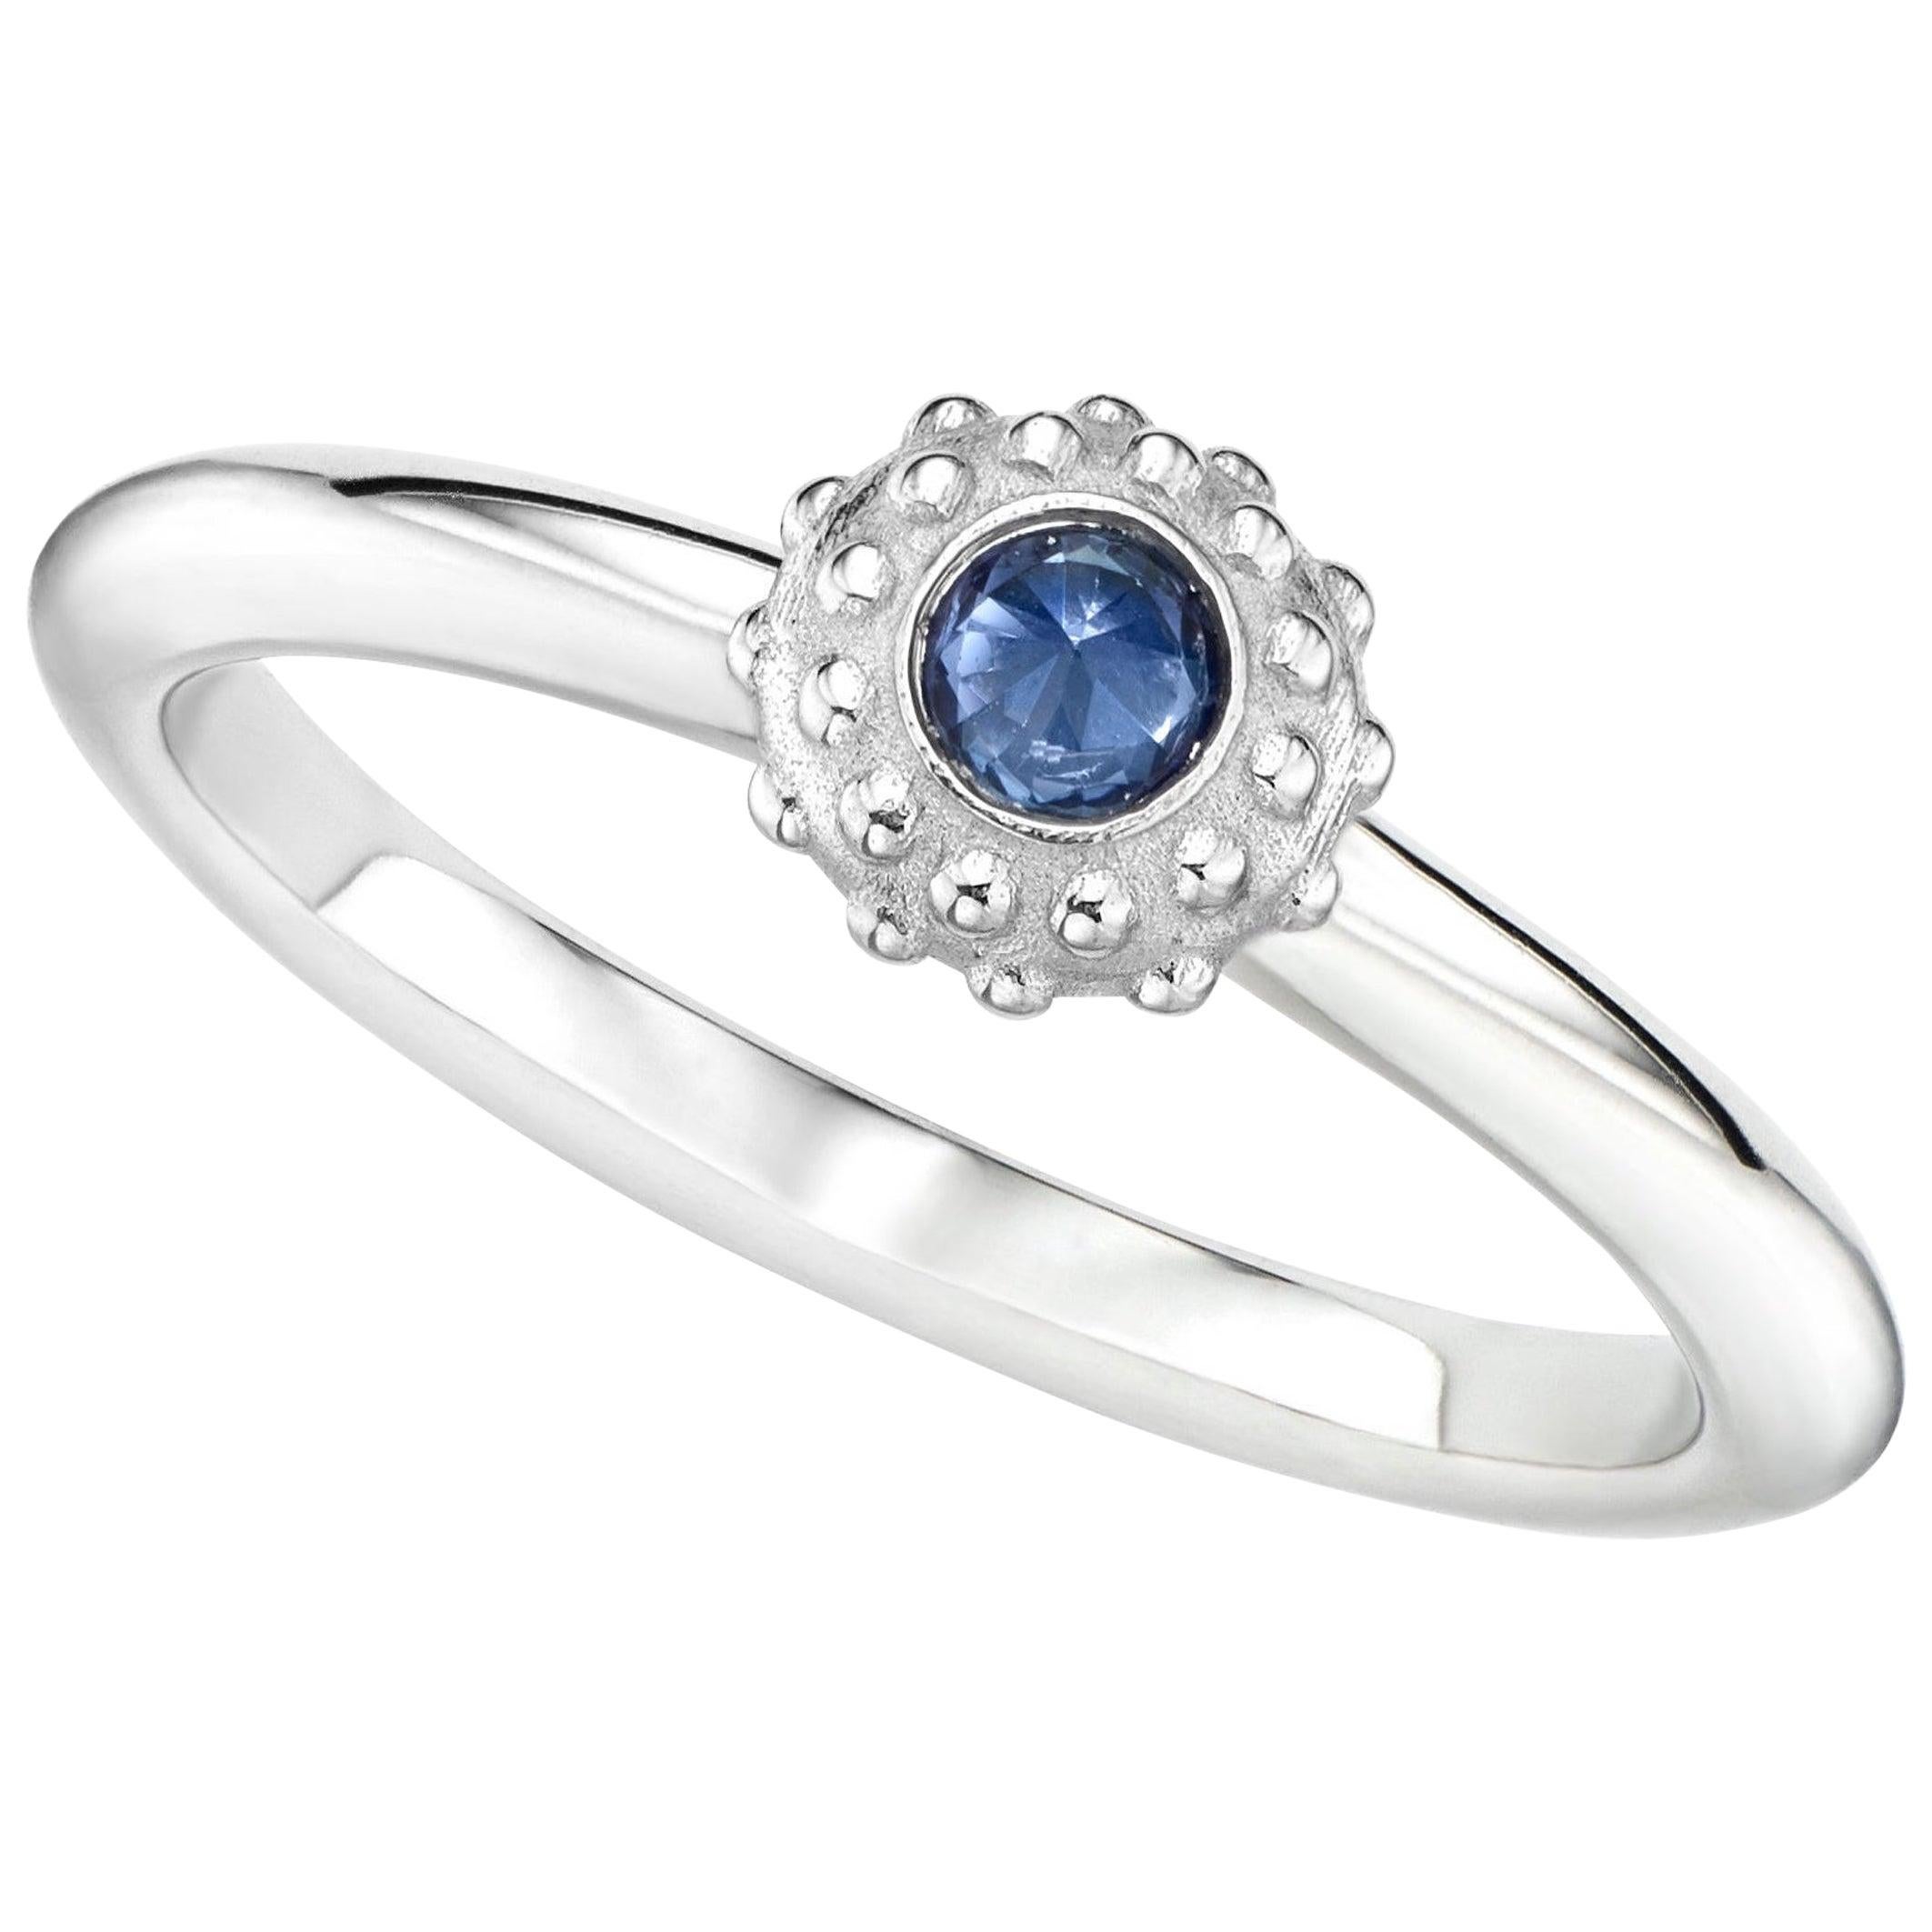 For Sale:  AnaKatarina White Gold and Sapphire 'Evolution' Stacking Ring